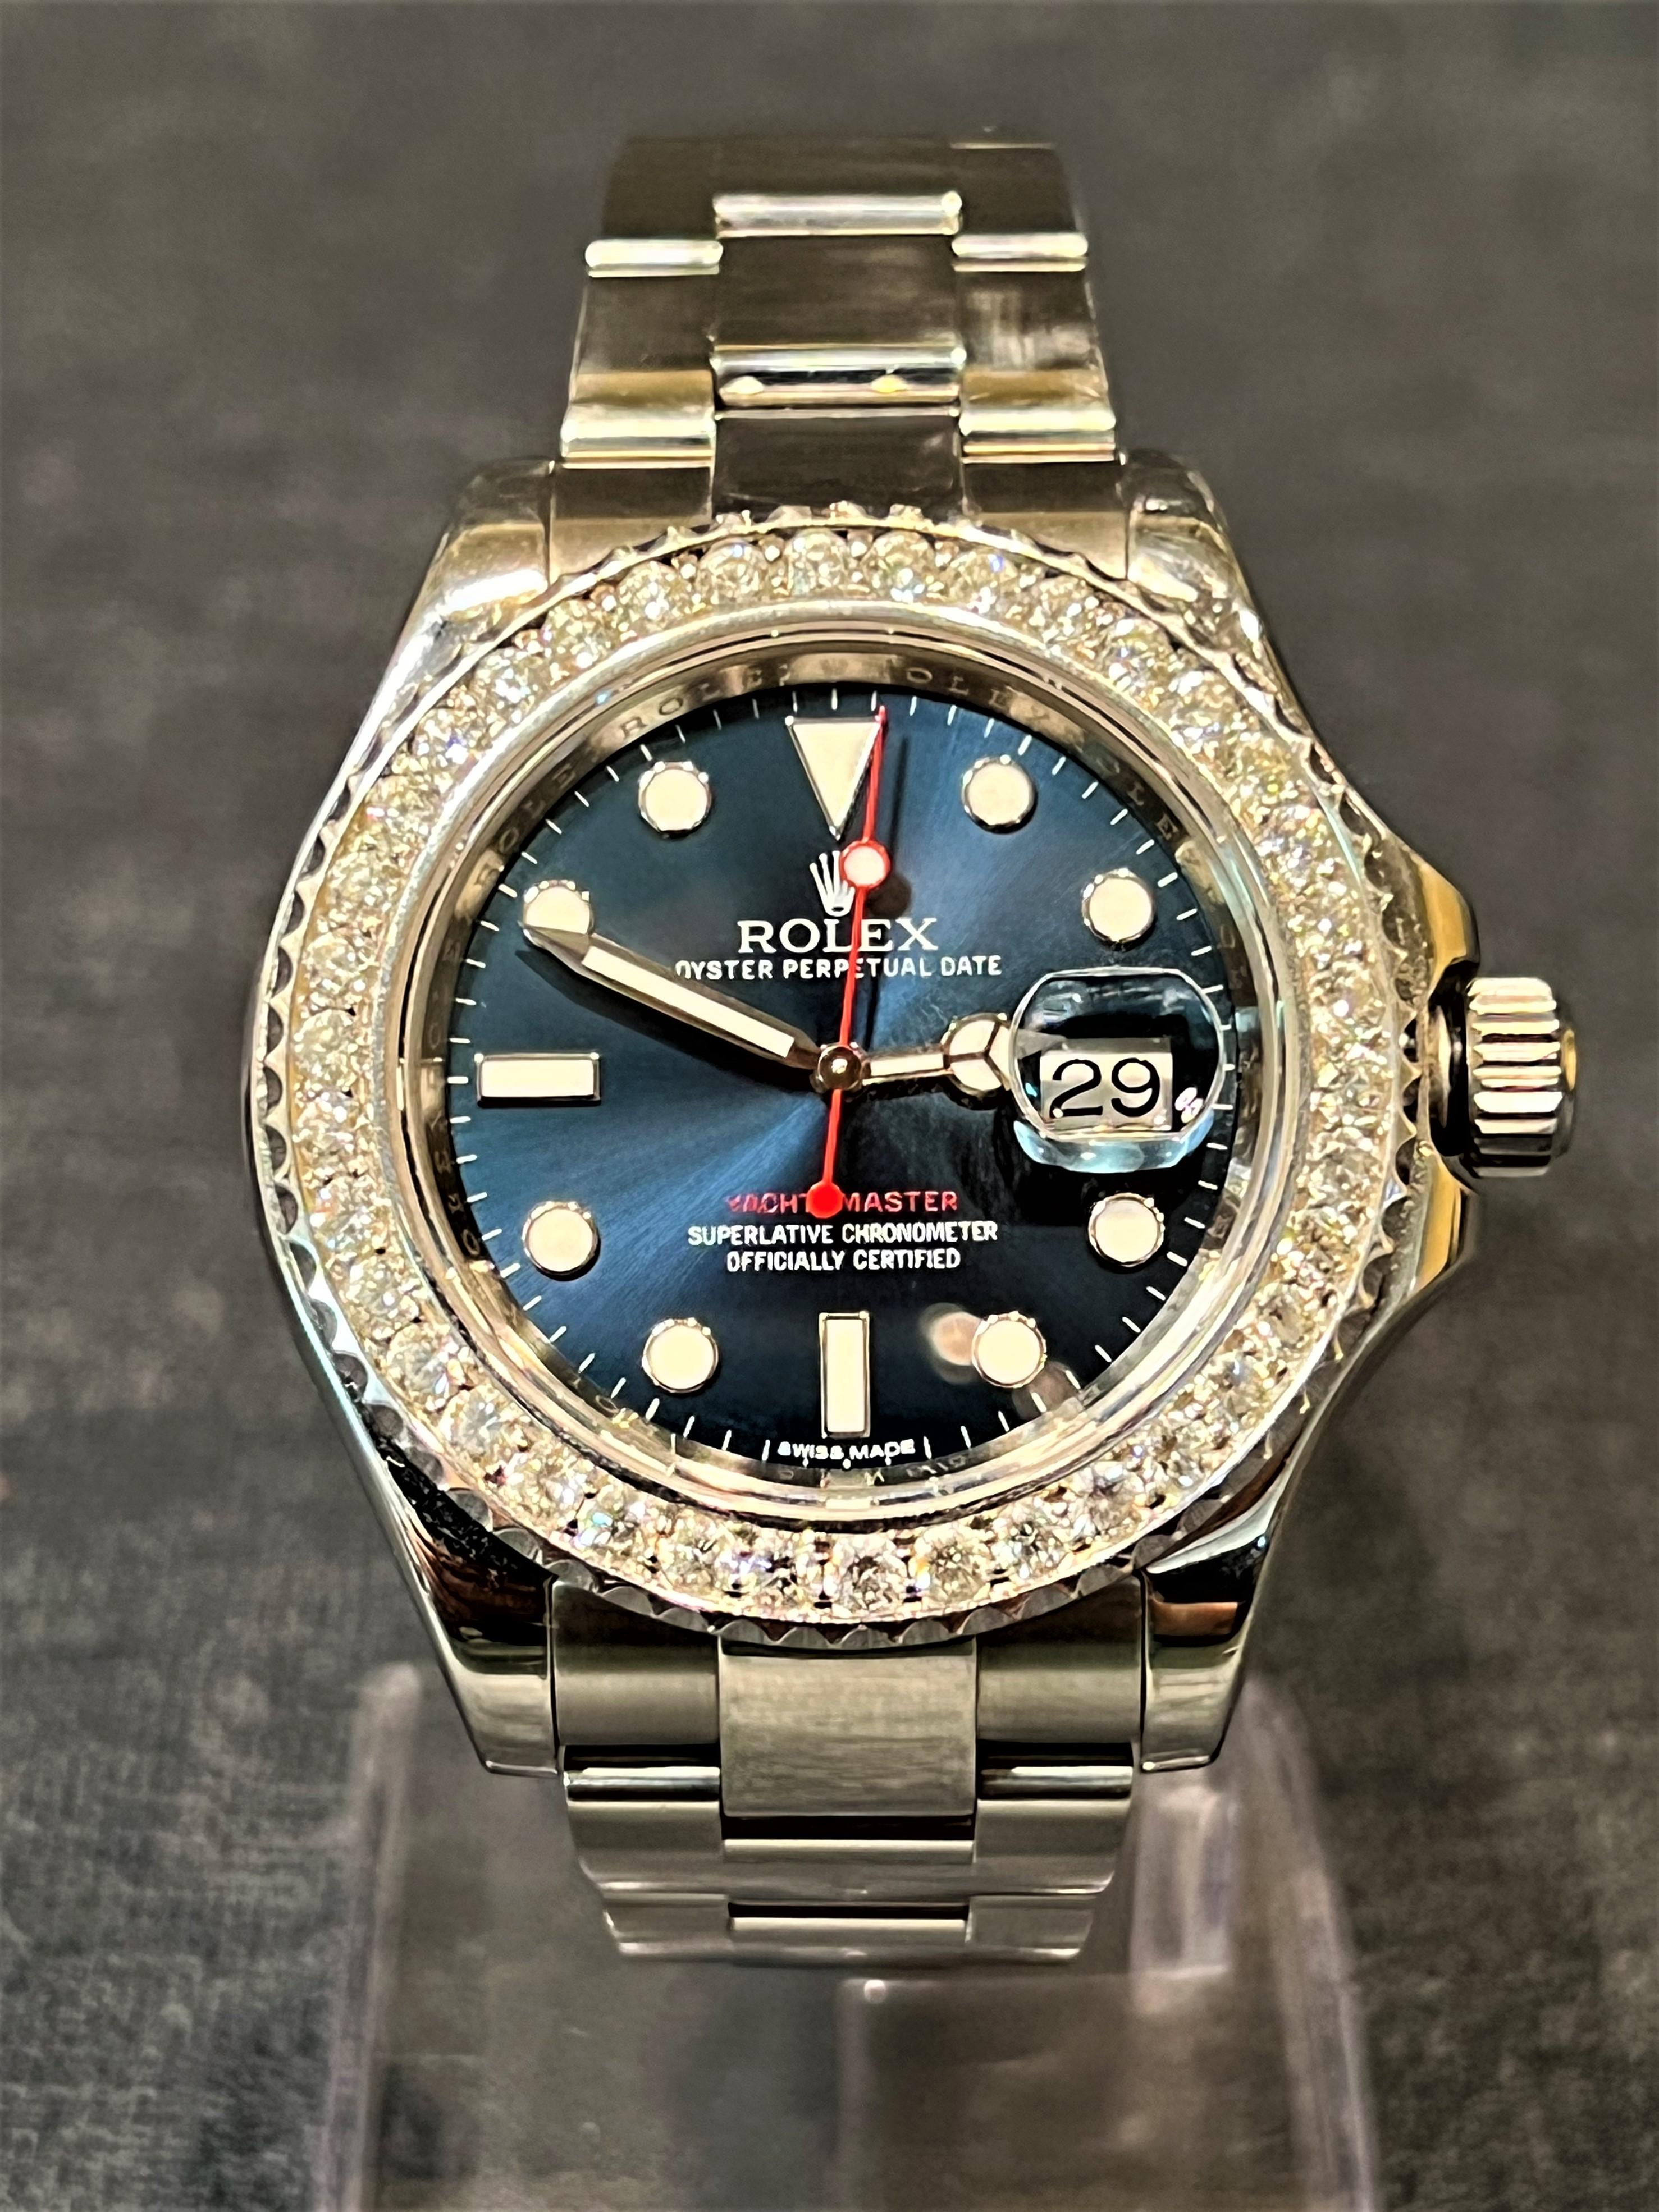 A contemporary styled Oyster Perpetual Yacht-Master wristwatch by Rolex with a 2.56 carat diamond bezel and a Blue index dial with Superluminova. Includes original box with papers and Swimpruf tag, Red Seal and a Superlative chronometer Officially